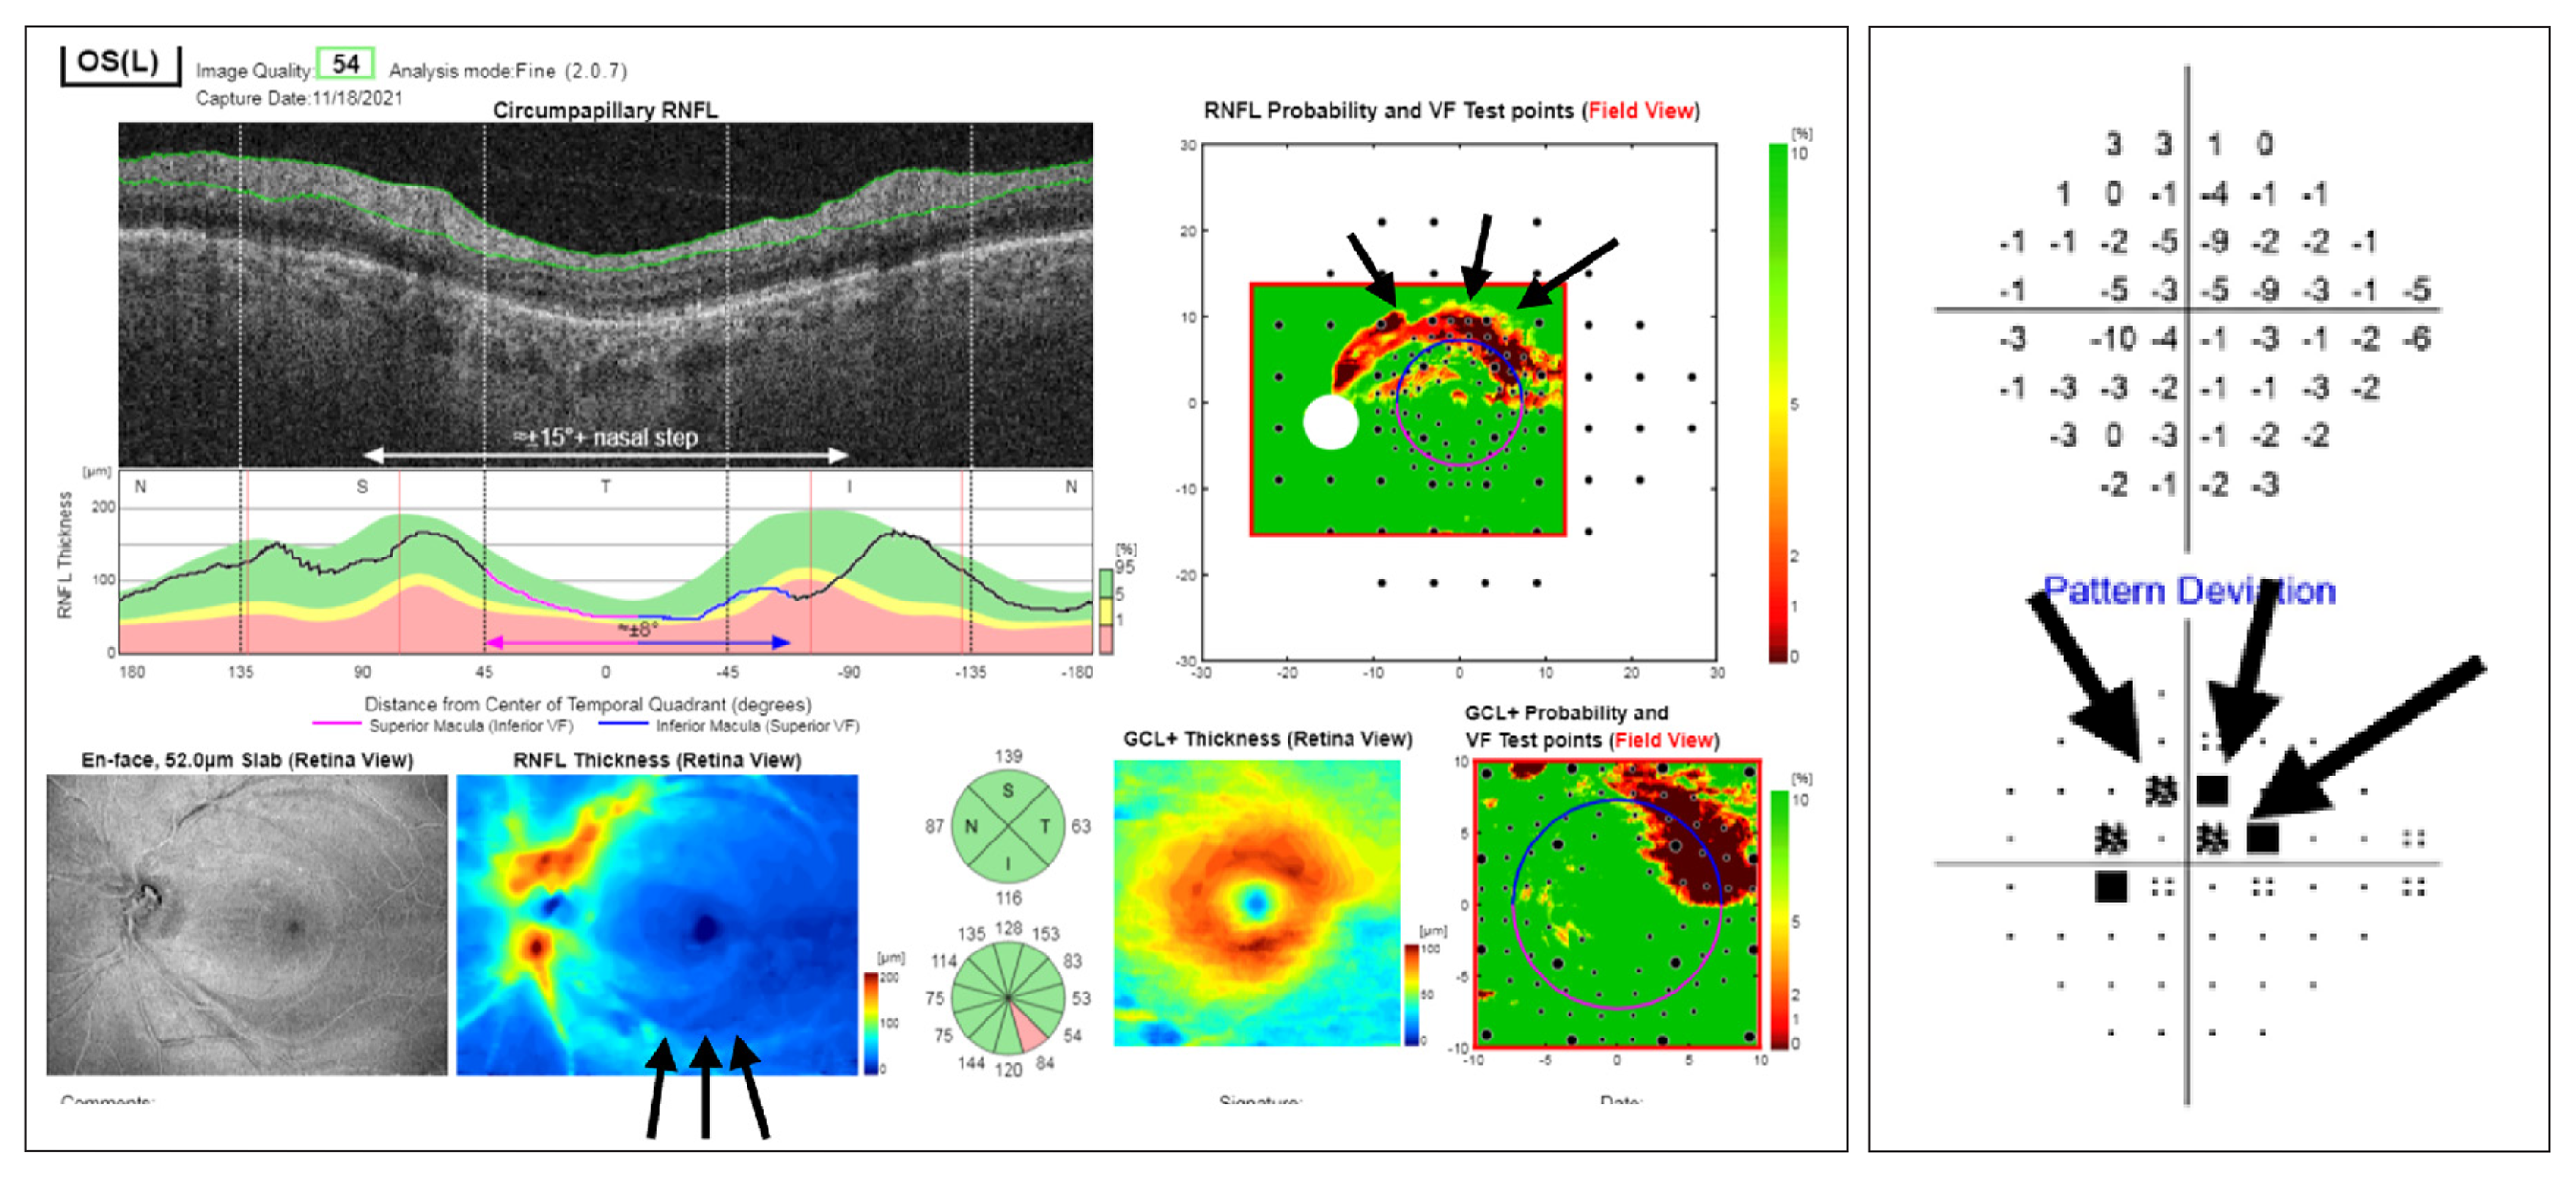 Application of this screening method might help providers who are not glaucoma specialists to determine who should and should not be referred for further evaluation and need for treatment. The OCT report is composed of probability and thickness maps for the RNFL and GCL as well as circumpapillary RNFL B-scan and thickness plot, all of which are used for classification by the Columbia method. In this case, there is an arcuate-like inferior hemiretinal defect that corresponds to the superior arcuate defect on the 24-2 visual field (black arrows).